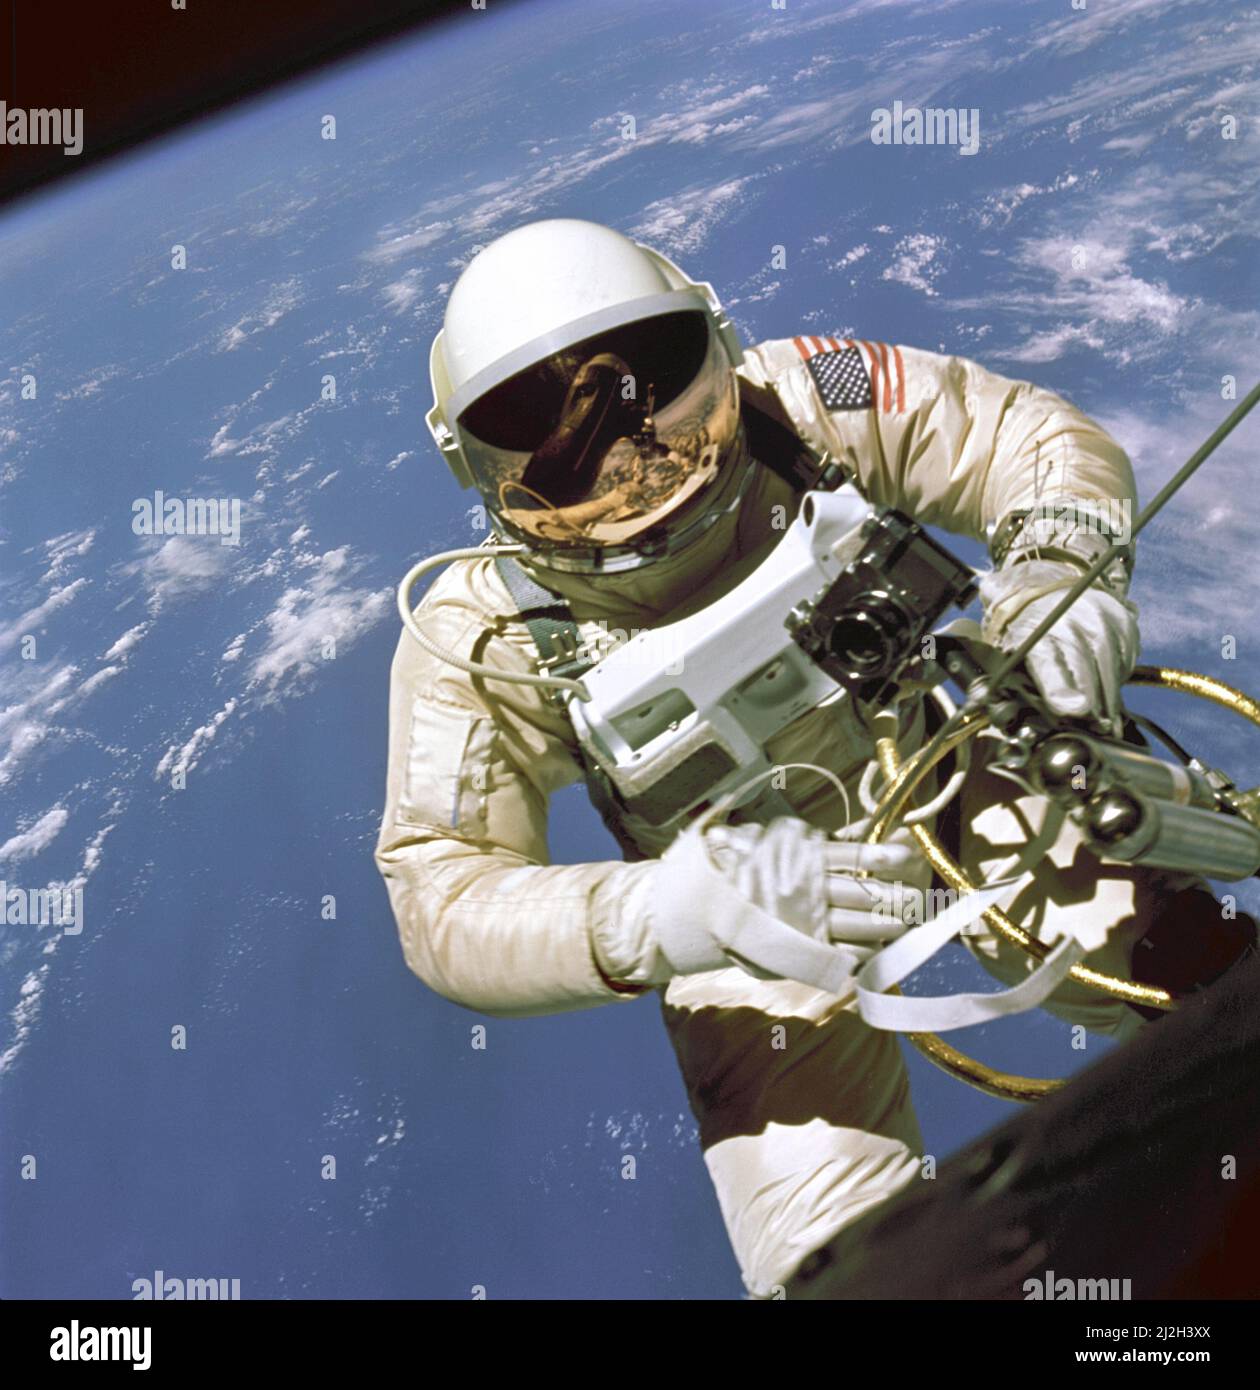 On June 3, 1965 Edward H. White II became the first American to step outside his spacecraft and let go, effectively setting himself adrift in the zero gravity of space. For 23 minutes White floated and maneuvered himself around the Gemini spacecraft while logging 6500 miles during his orbital stroll. White was attached to the spacecraft by a 25 foot umbilical line and a 23-ft. tether line, both wrapped in gold tape to form one cord. In his right hand White carries a Hand Held Self Maneuvering Unit (HHSMU) which is used to move about the weightless environment of space. The visor of his helmet Stock Photo